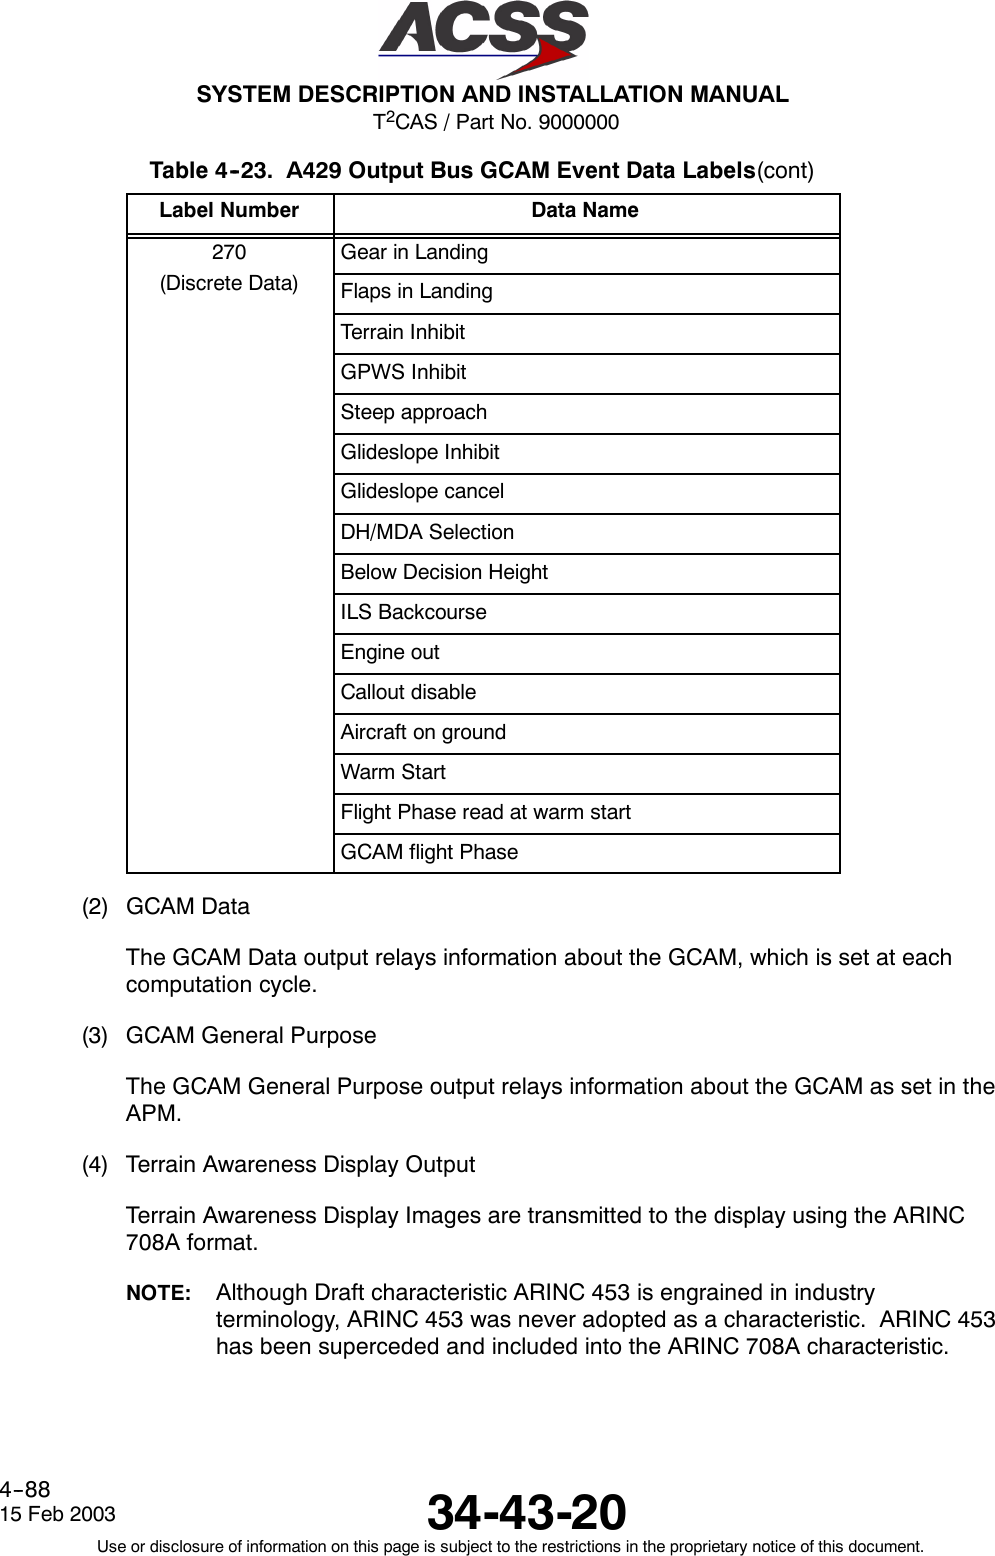 T2CAS / Part No. 9000000SYSTEM DESCRIPTION AND INSTALLATION MANUAL34-43-2015 Feb 2003Use or disclosure of information on this page is subject to the restrictions in the proprietary notice of this document.4--88Table 4--23. A429 Output Bus GCAM Event Data Labels(cont)Label Number Data Name270 Gear in Landing(Discrete Data) Flaps in LandingTerrain InhibitGPWS InhibitSteep approachGlideslope InhibitGlideslope cancelDH/MDA SelectionBelow Decision HeightILS BackcourseEngine outCallout disableAircraft on groundWarm StartFlight Phase read at warm startGCAM flight Phase(2) GCAM DataThe GCAM Data output relays information about the GCAM, which is set at eachcomputation cycle.(3) GCAM General PurposeThe GCAM General Purpose output relays information about the GCAM as set in theAPM.(4) Terrain Awareness Display OutputTerrain Awareness Display Images are transmitted to the display using the ARINC708A format.NOTE: Although Draft characteristic ARINC 453 is engrained in industryterminology, ARINC 453 was never adopted as a characteristic. ARINC 453has been superceded and included into the ARINC 708A characteristic.